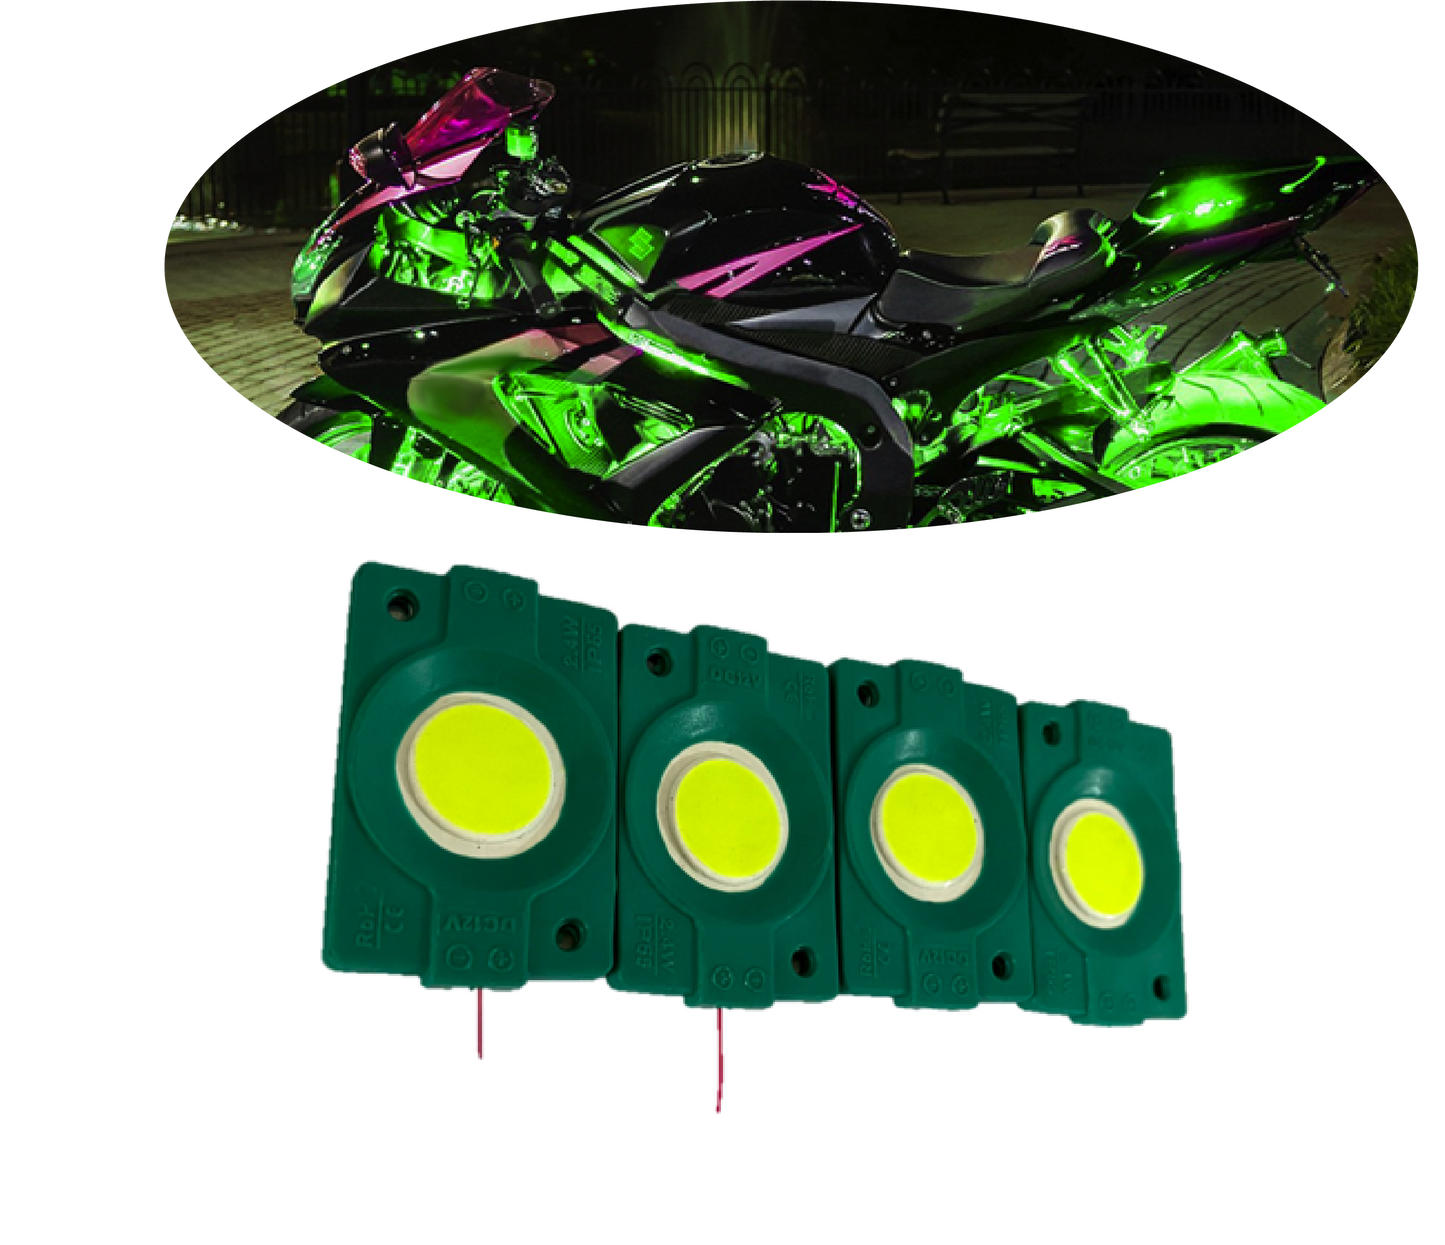 hjg Sunny Day GREEN IMPORTED Underglow PATCH LIGHTS (Front/Rear , Bike Body Lights) - PACK OF 4 - IP65 WATERPROOF DUSTPROOF SHOCKPROOF - Universal Decorative Light for all Motorbike, Car LED  - bikerstore.in